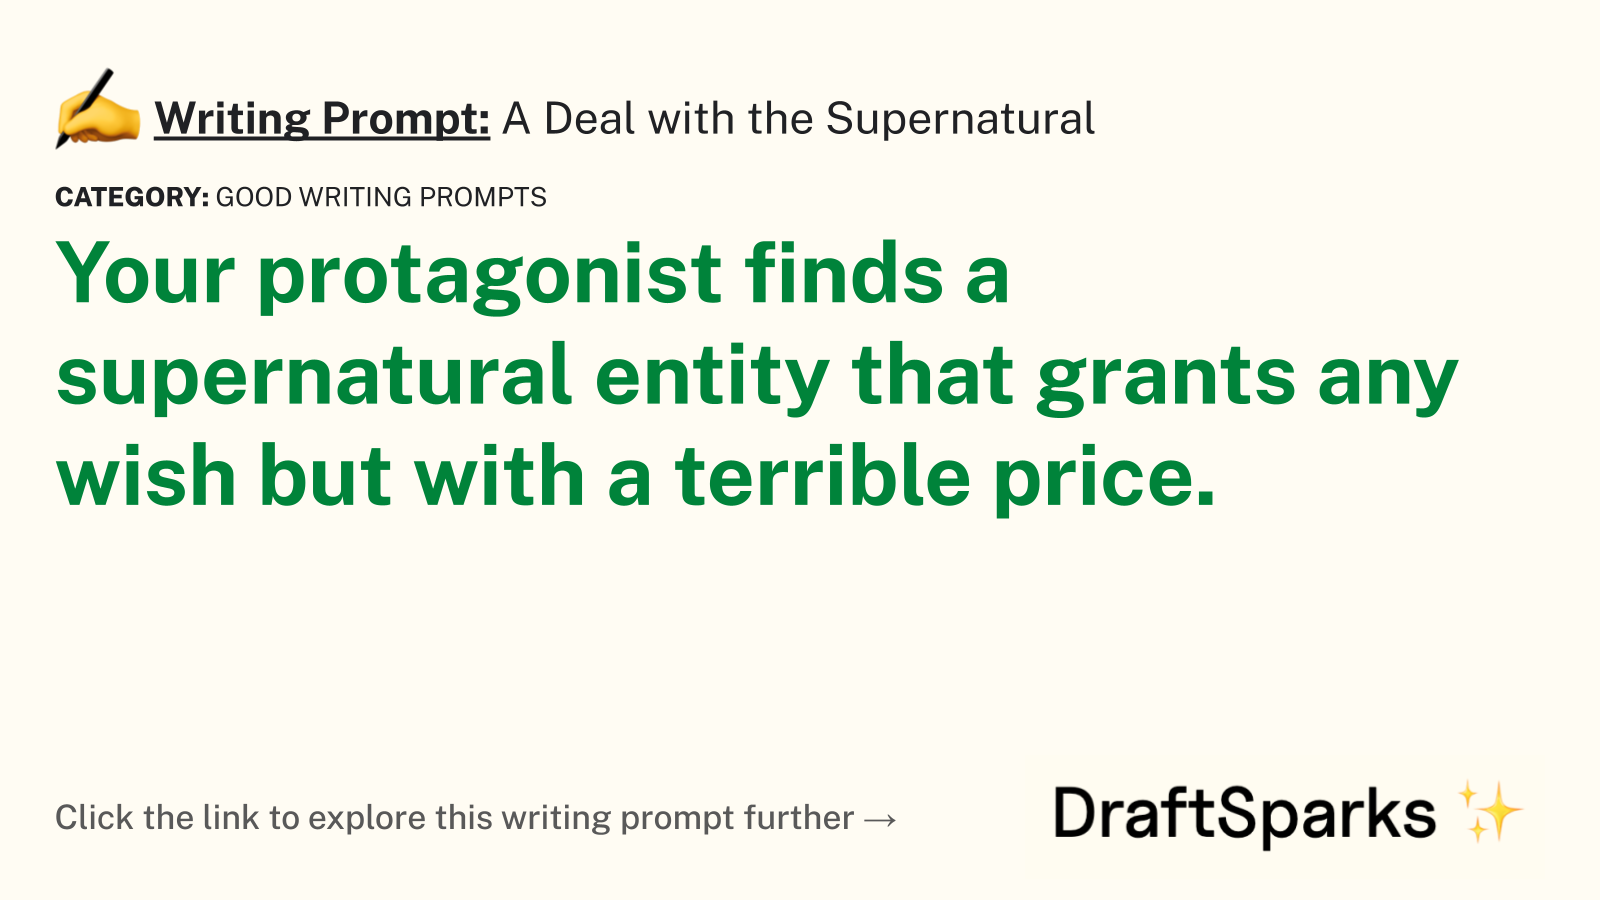 A Deal with the Supernatural